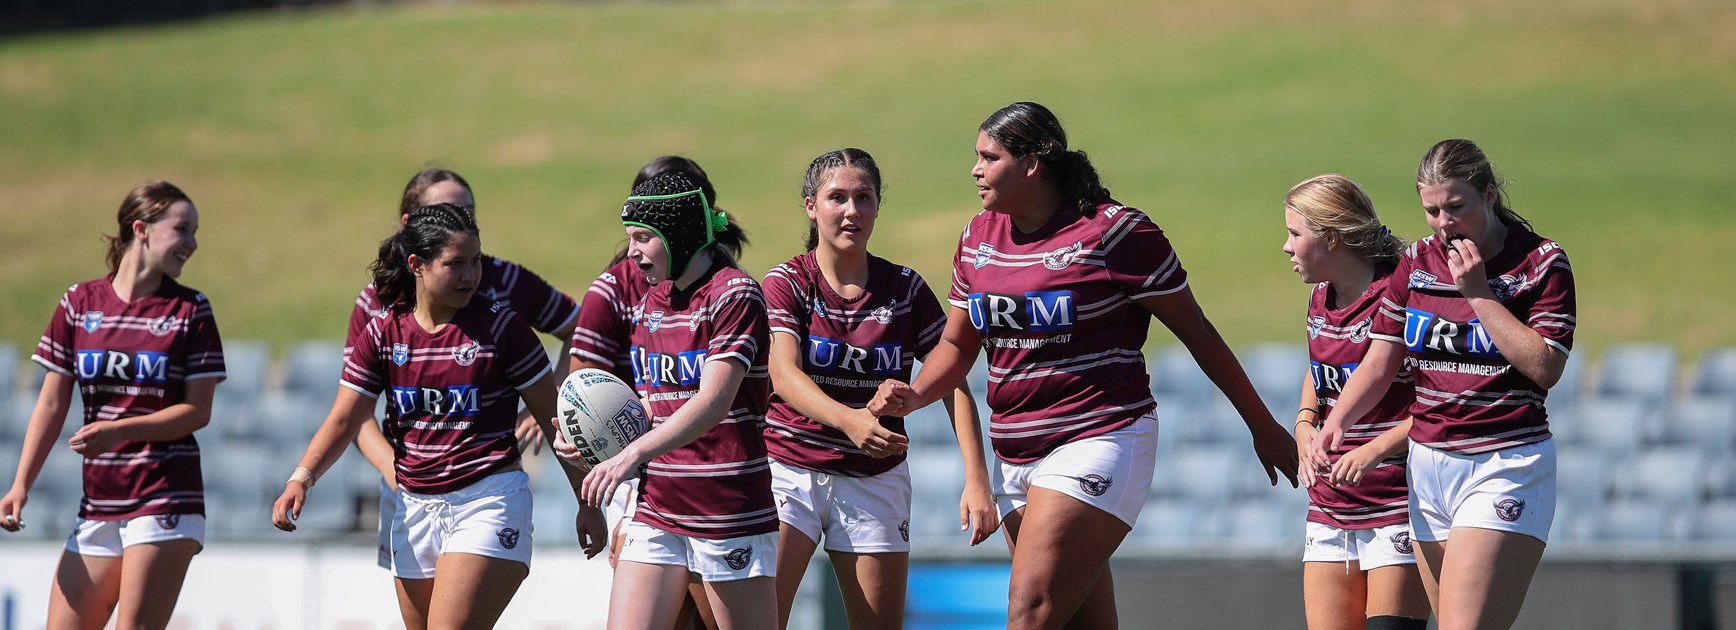 Strong effort...the Sea Eagles walk back following a try to prop Mequynne Logan

